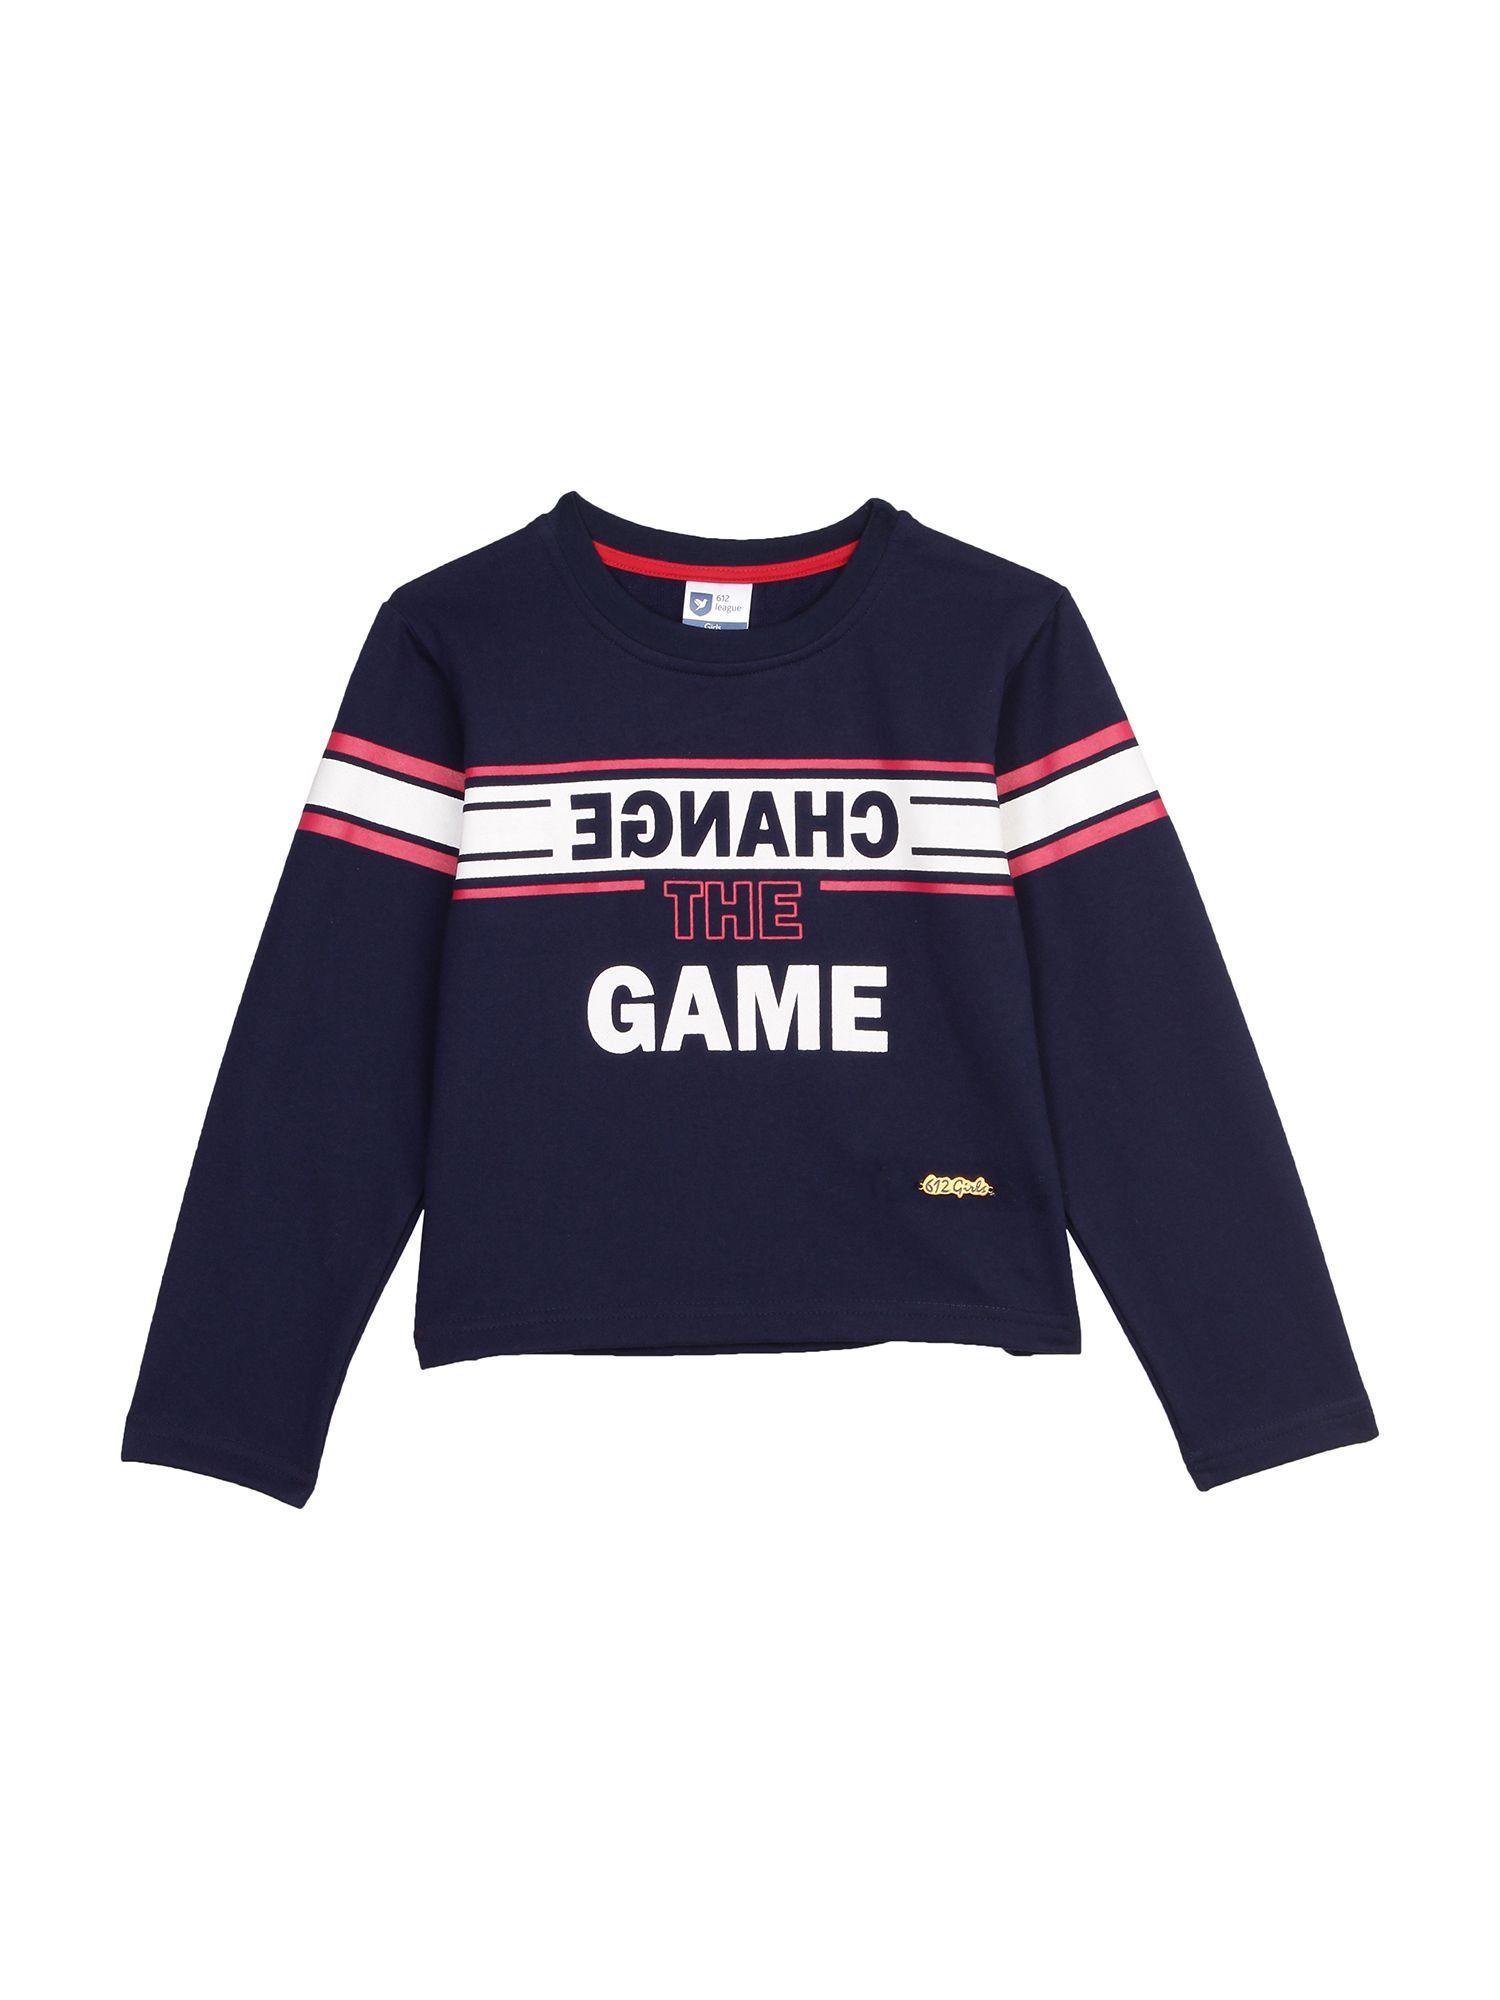 girl's sweater in navy color